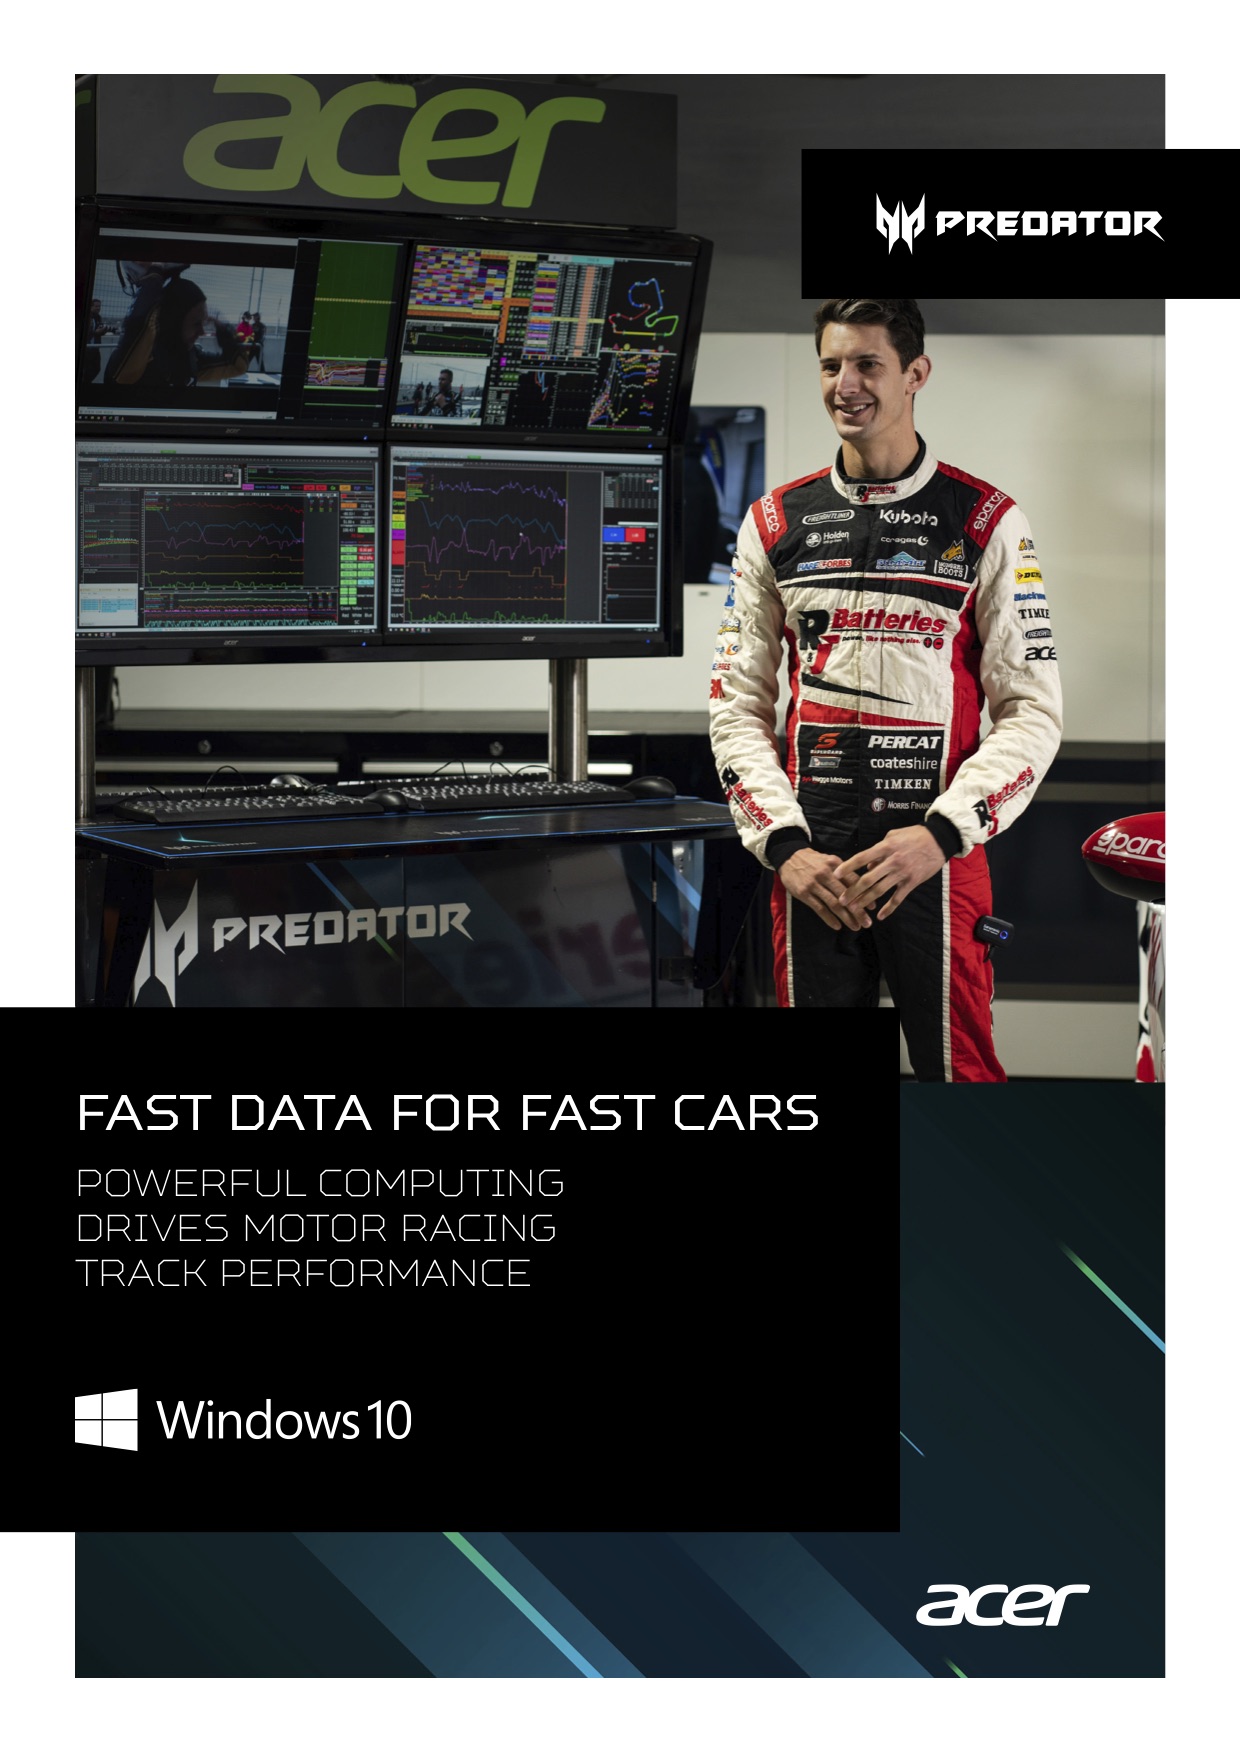 Acer technology gives racing team a performance advantage.